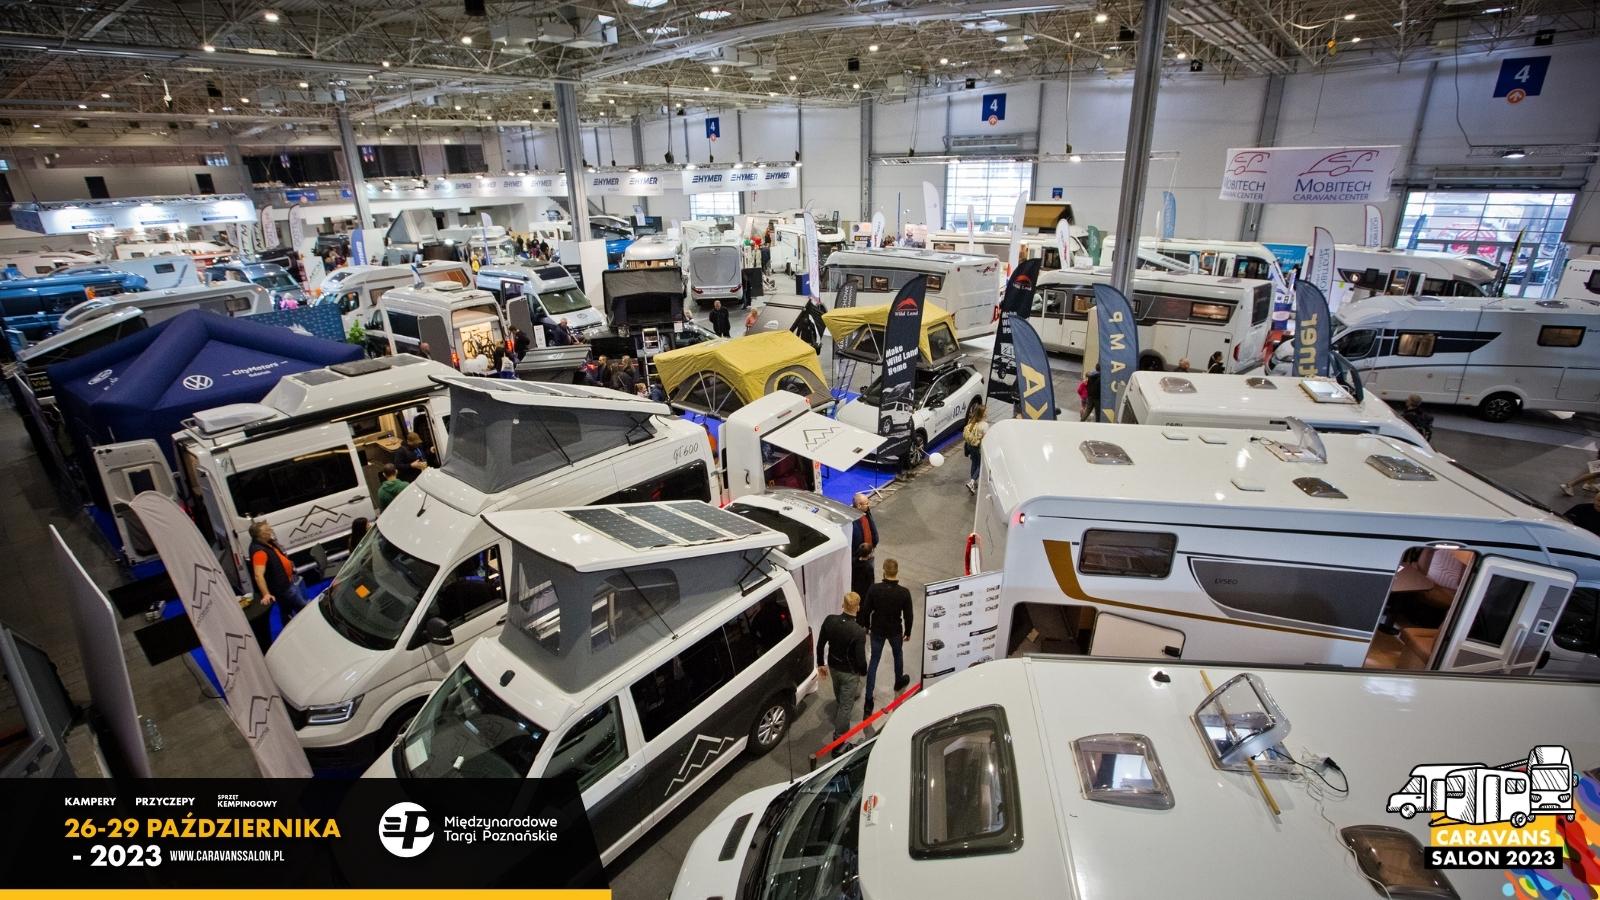 There are already over 80 exhibitors on the list of the Caravans Salon Poland fair in Poznań – image 1